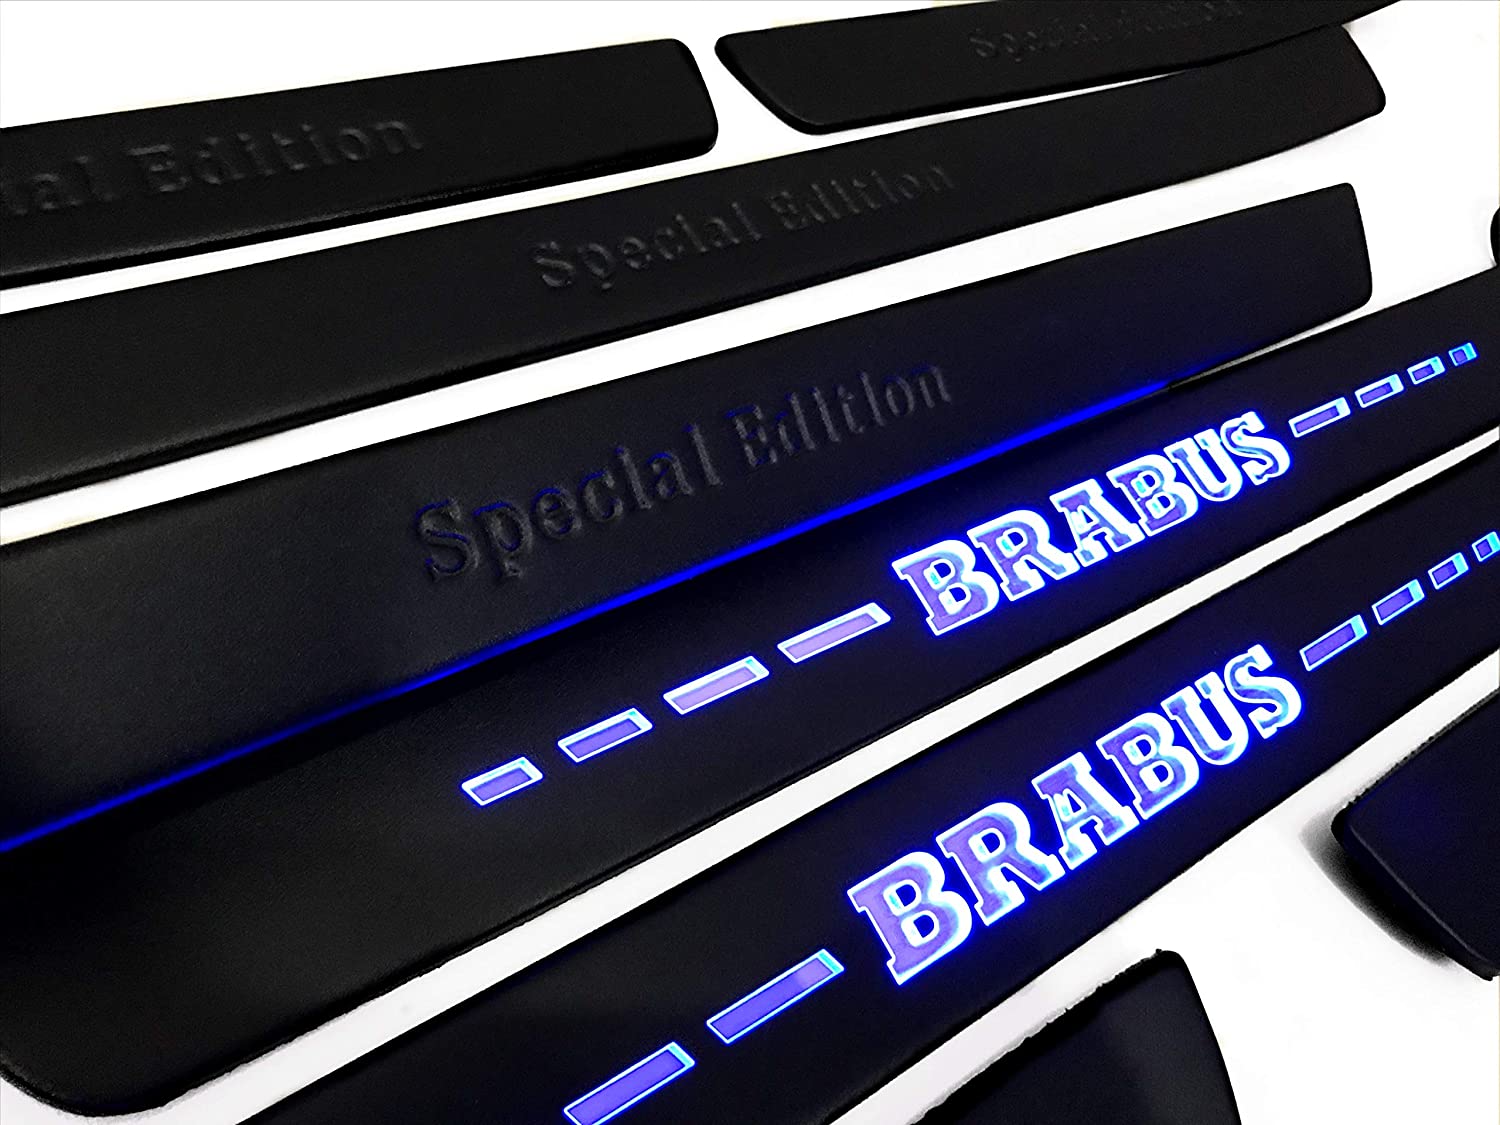 Mercedes-Benz Compatible with Brabus Style Special Edition W222 S222 S63 S500 S550 S65 S Class Entrance mouldings LED Illuminated Door Sills Interior Trim Set Stainless Steel Black Matte Blue Sign